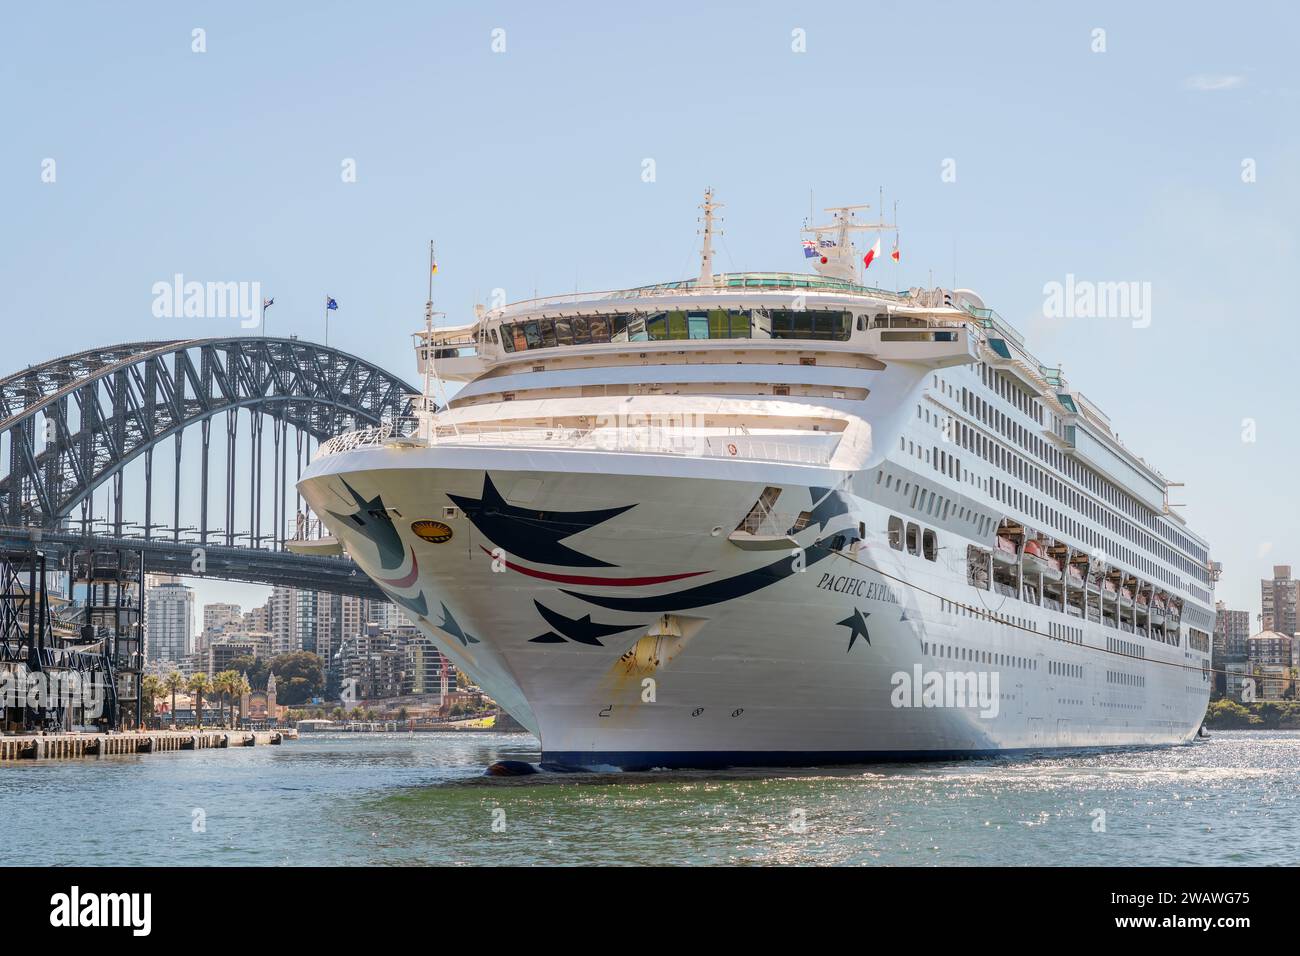 Sydney, Australia - April 19, 2022: P&O Cruises Pacific Explorer cruise ship on the way from Sydney Harbour to White Bay Cruise Terminal Stock Photo